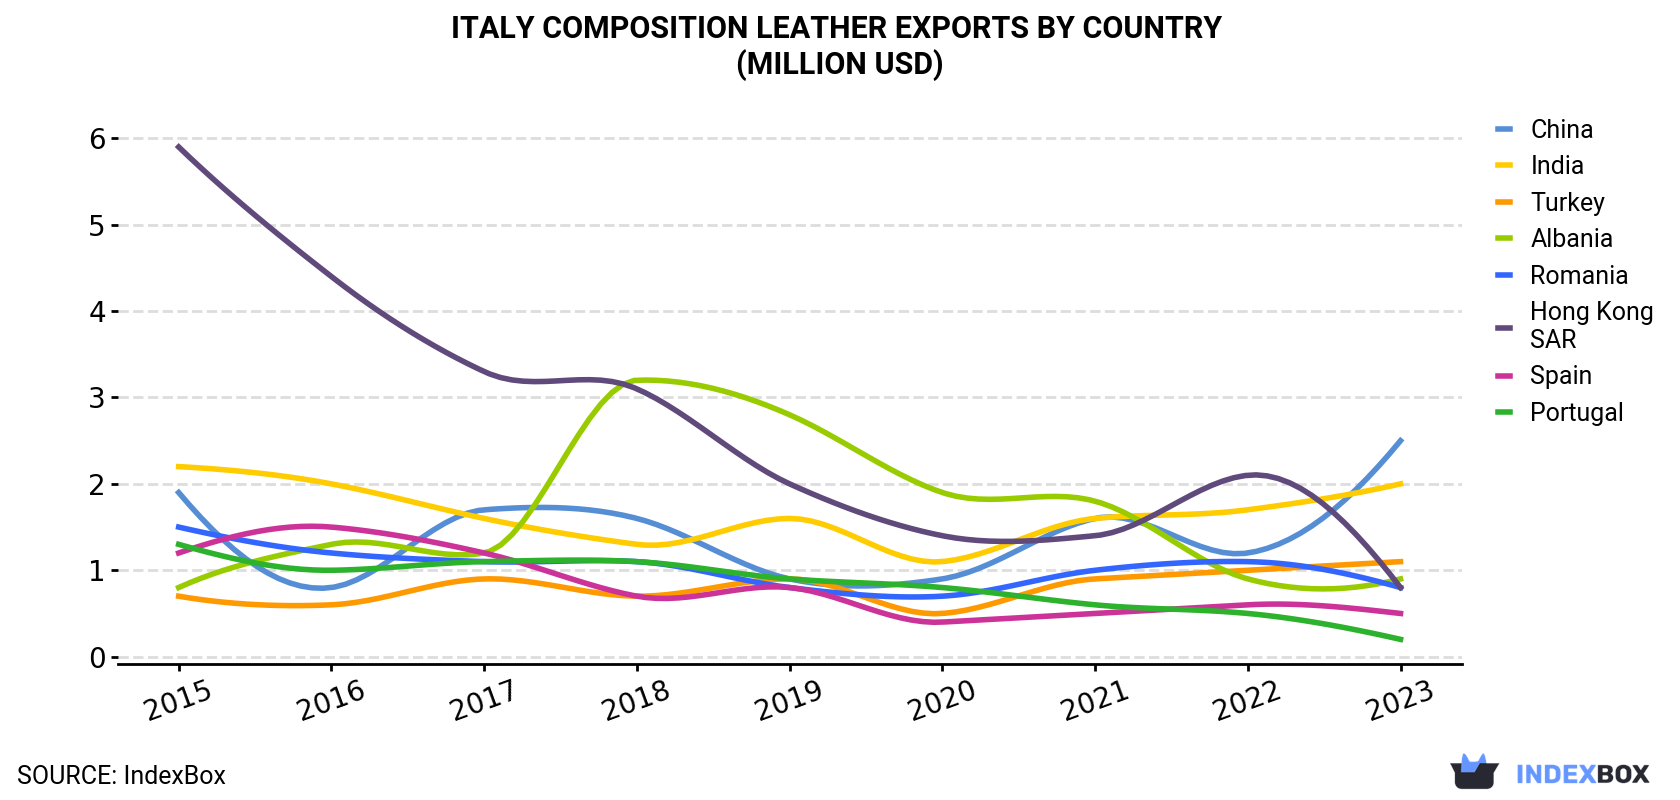 Italy Composition Leather Exports By Country (Million USD)